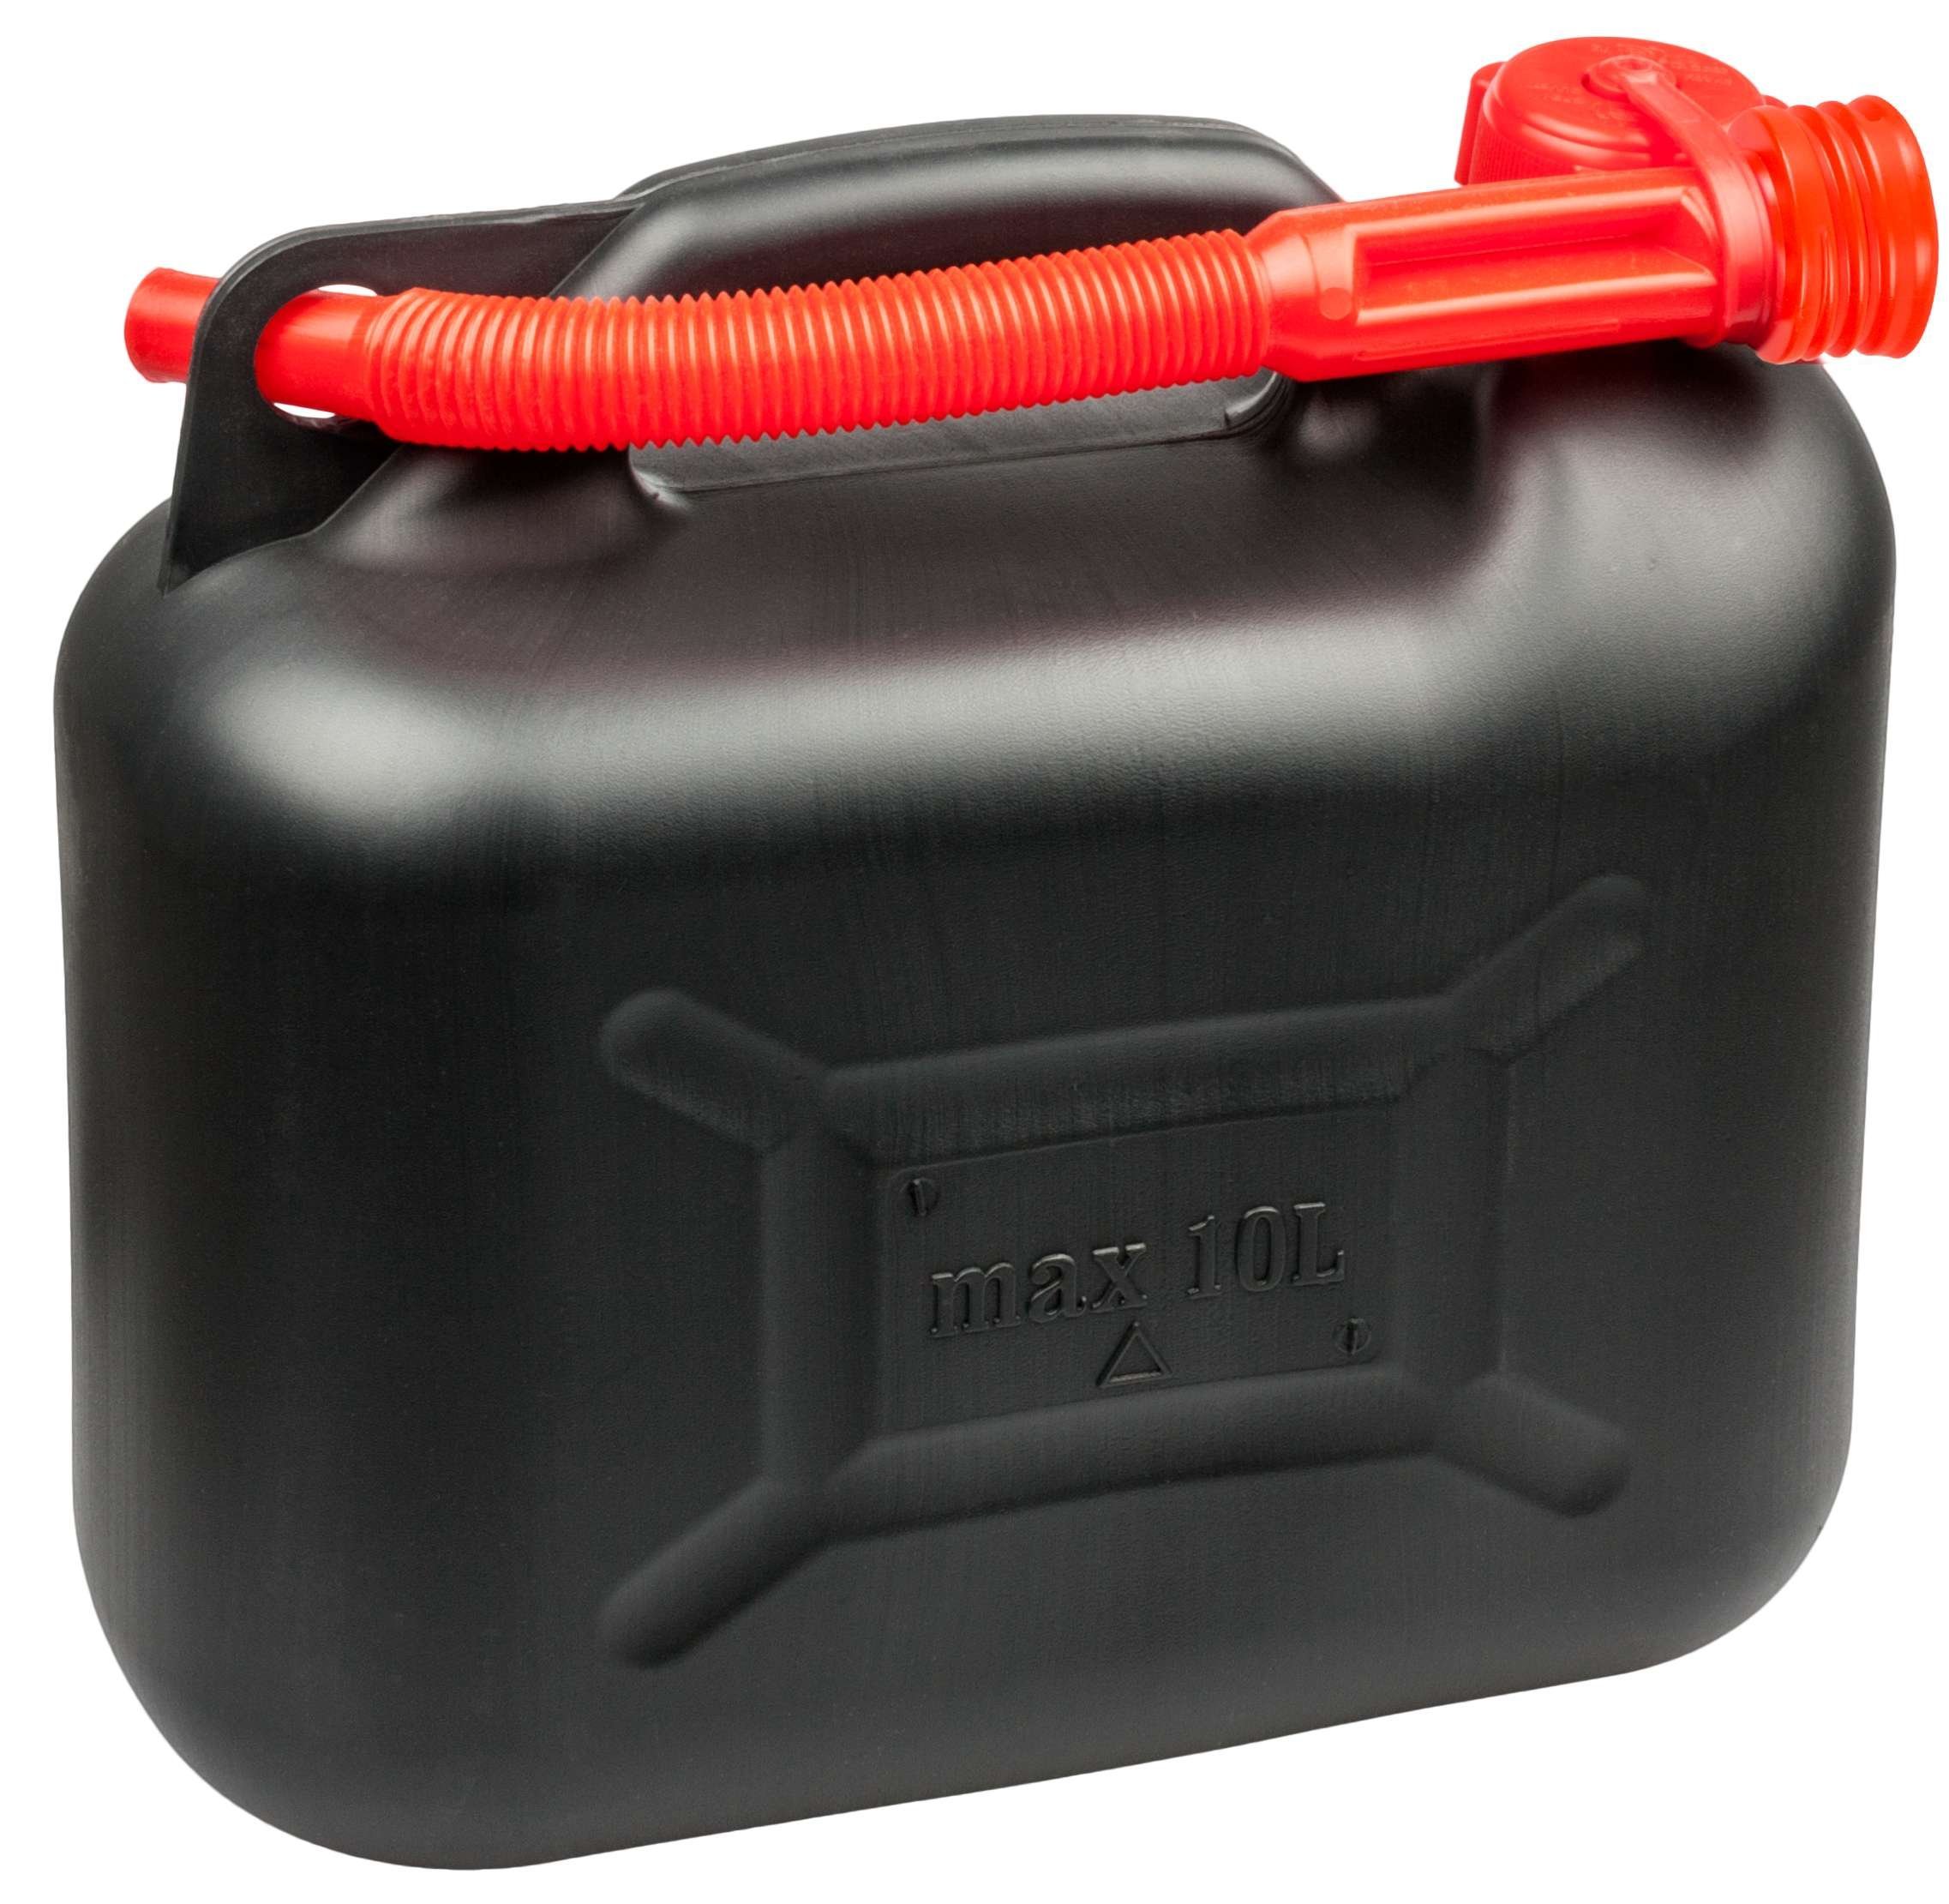 Petrol canister 10 litres - UN-approved with safety closure